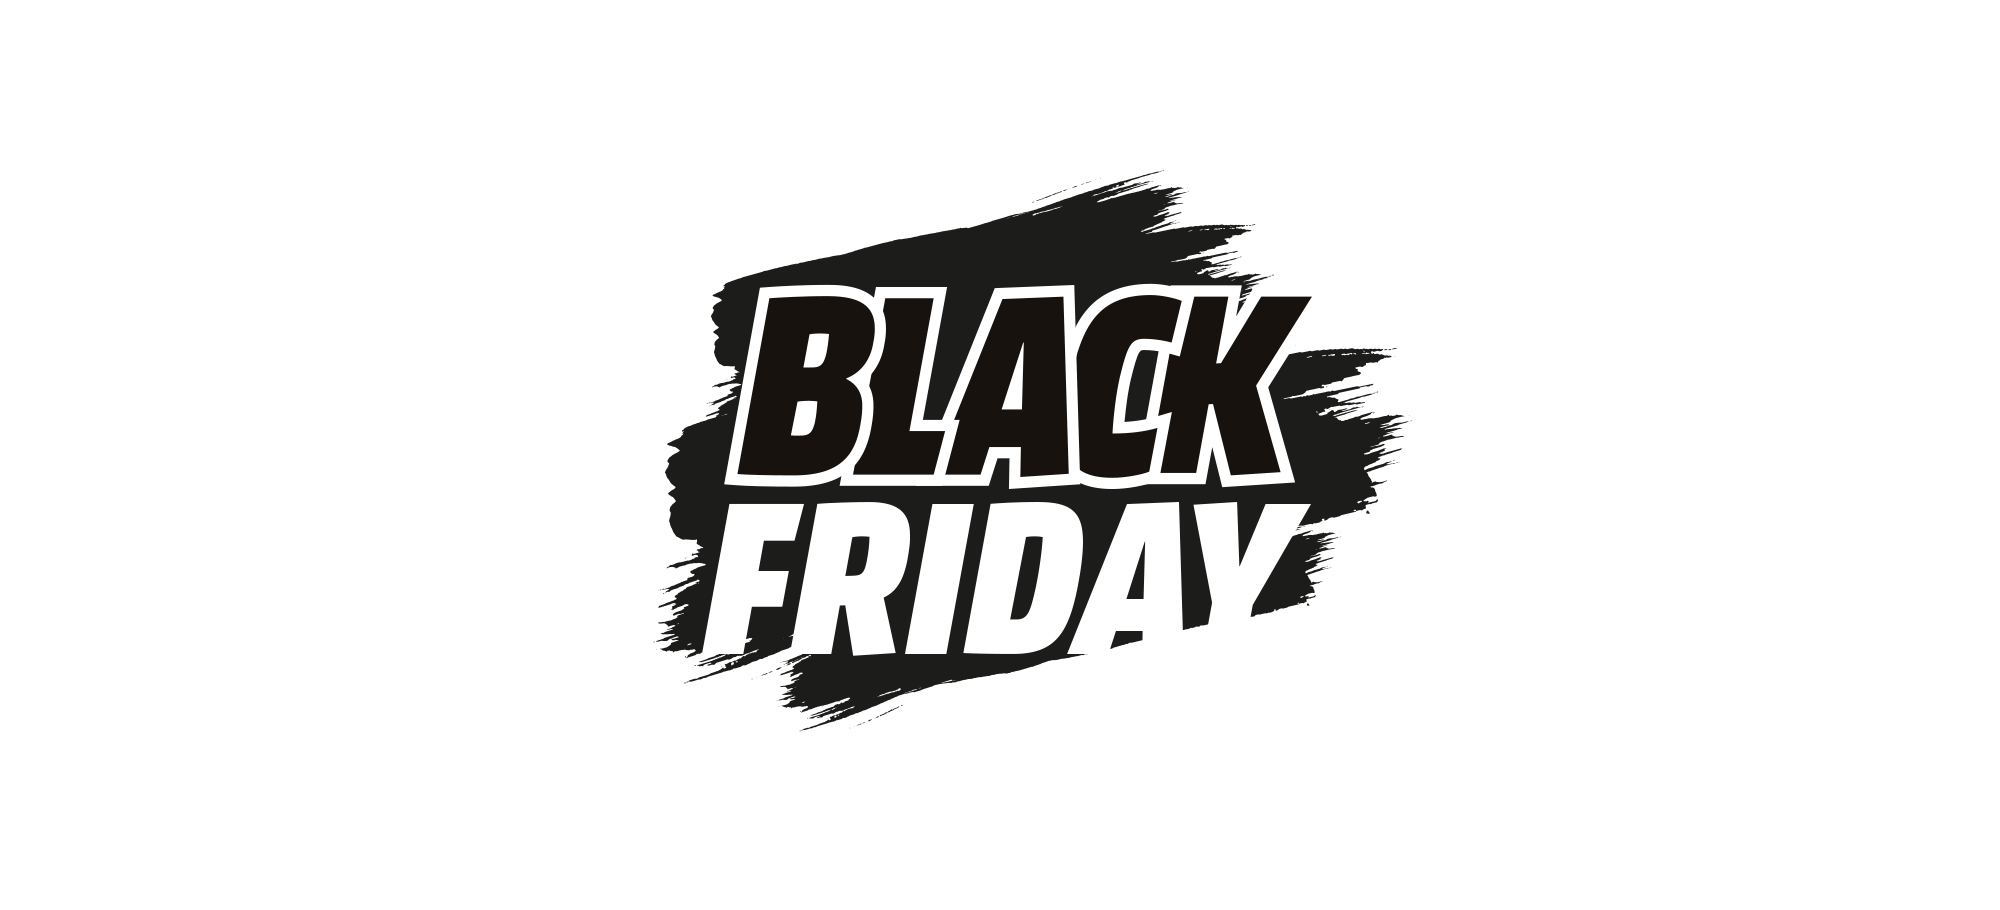 office for mac black friday sale